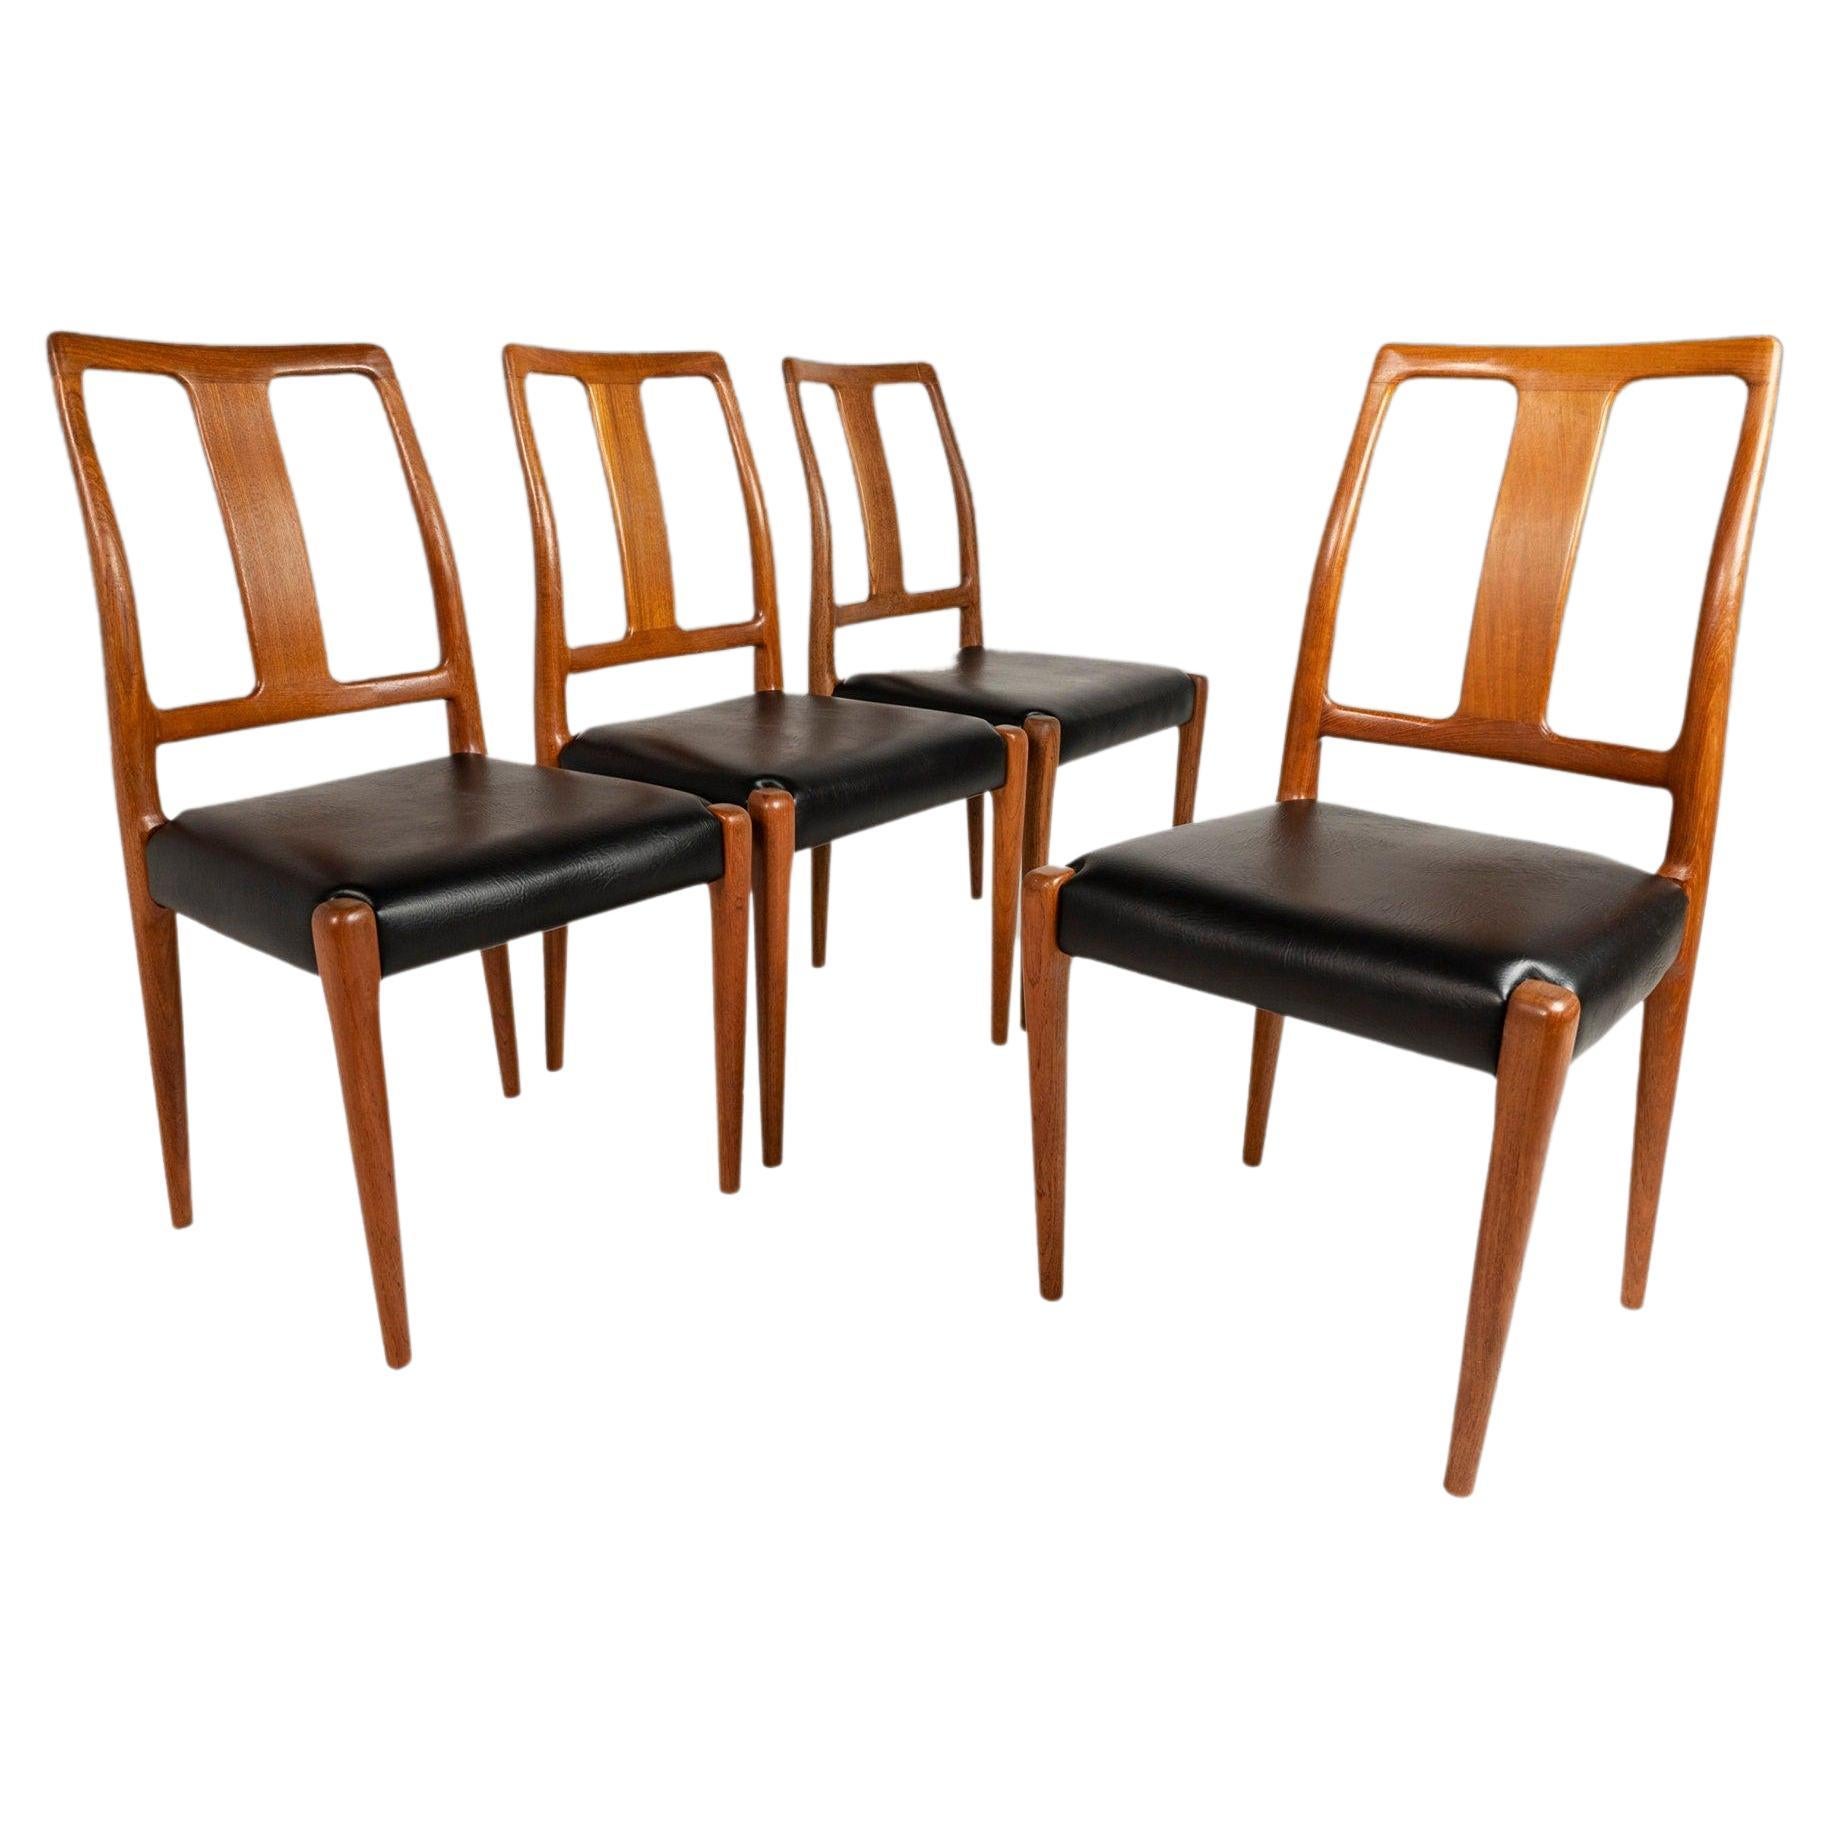 Set of Four '4' Teak Dining Chair by D-SCAN Newly Upholstered, c. 1970s For Sale